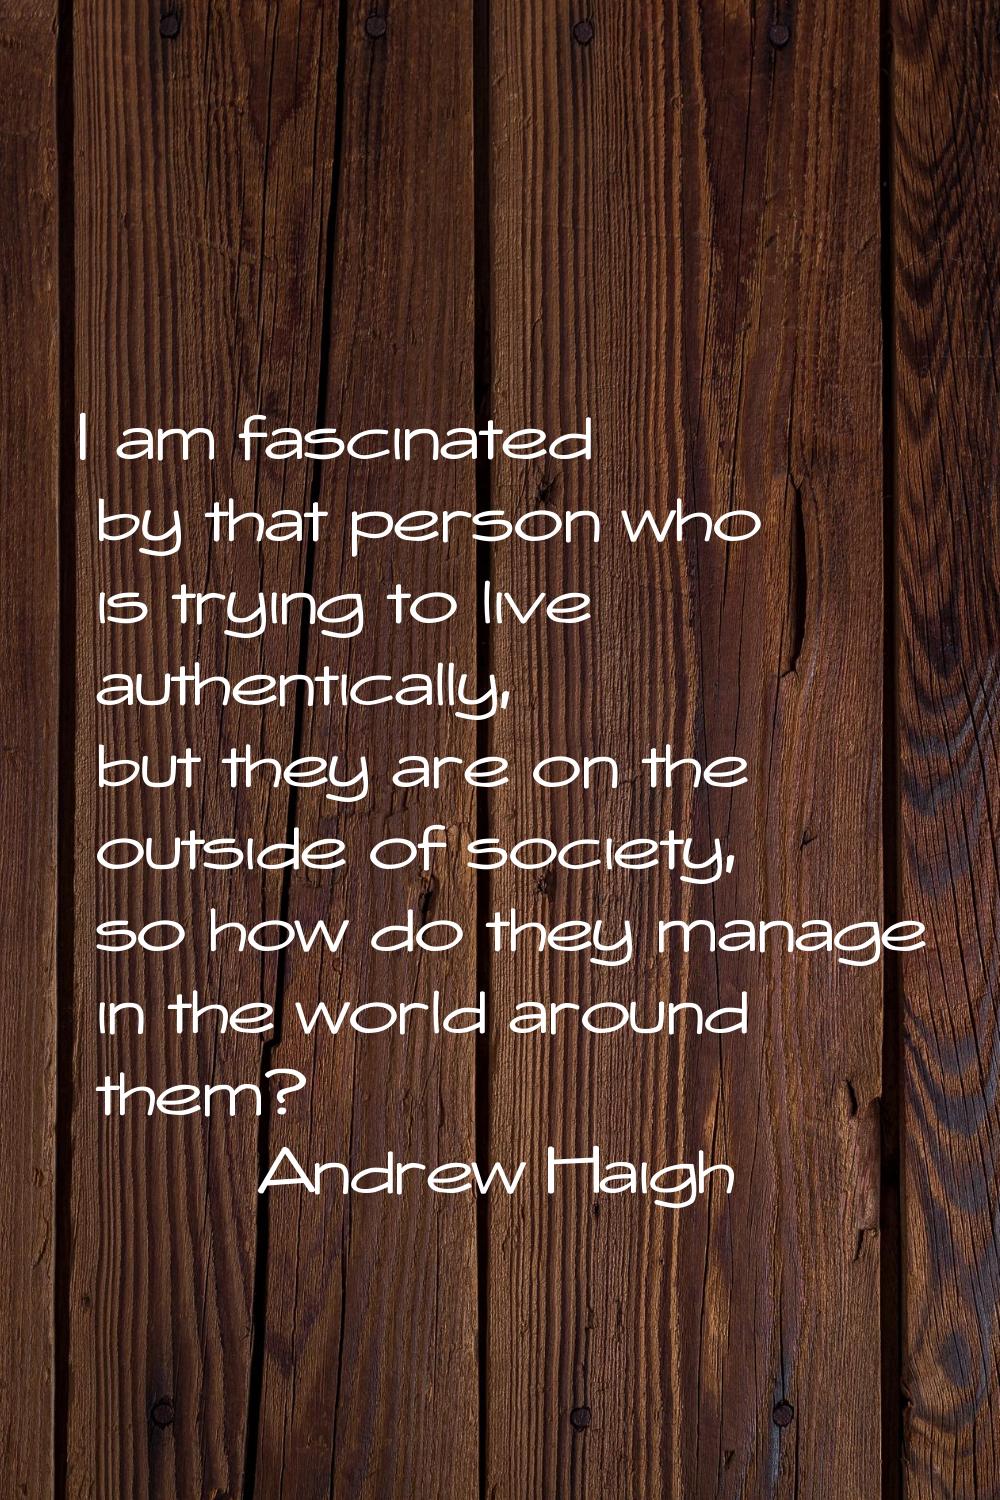 I am fascinated by that person who is trying to live authentically, but they are on the outside of 